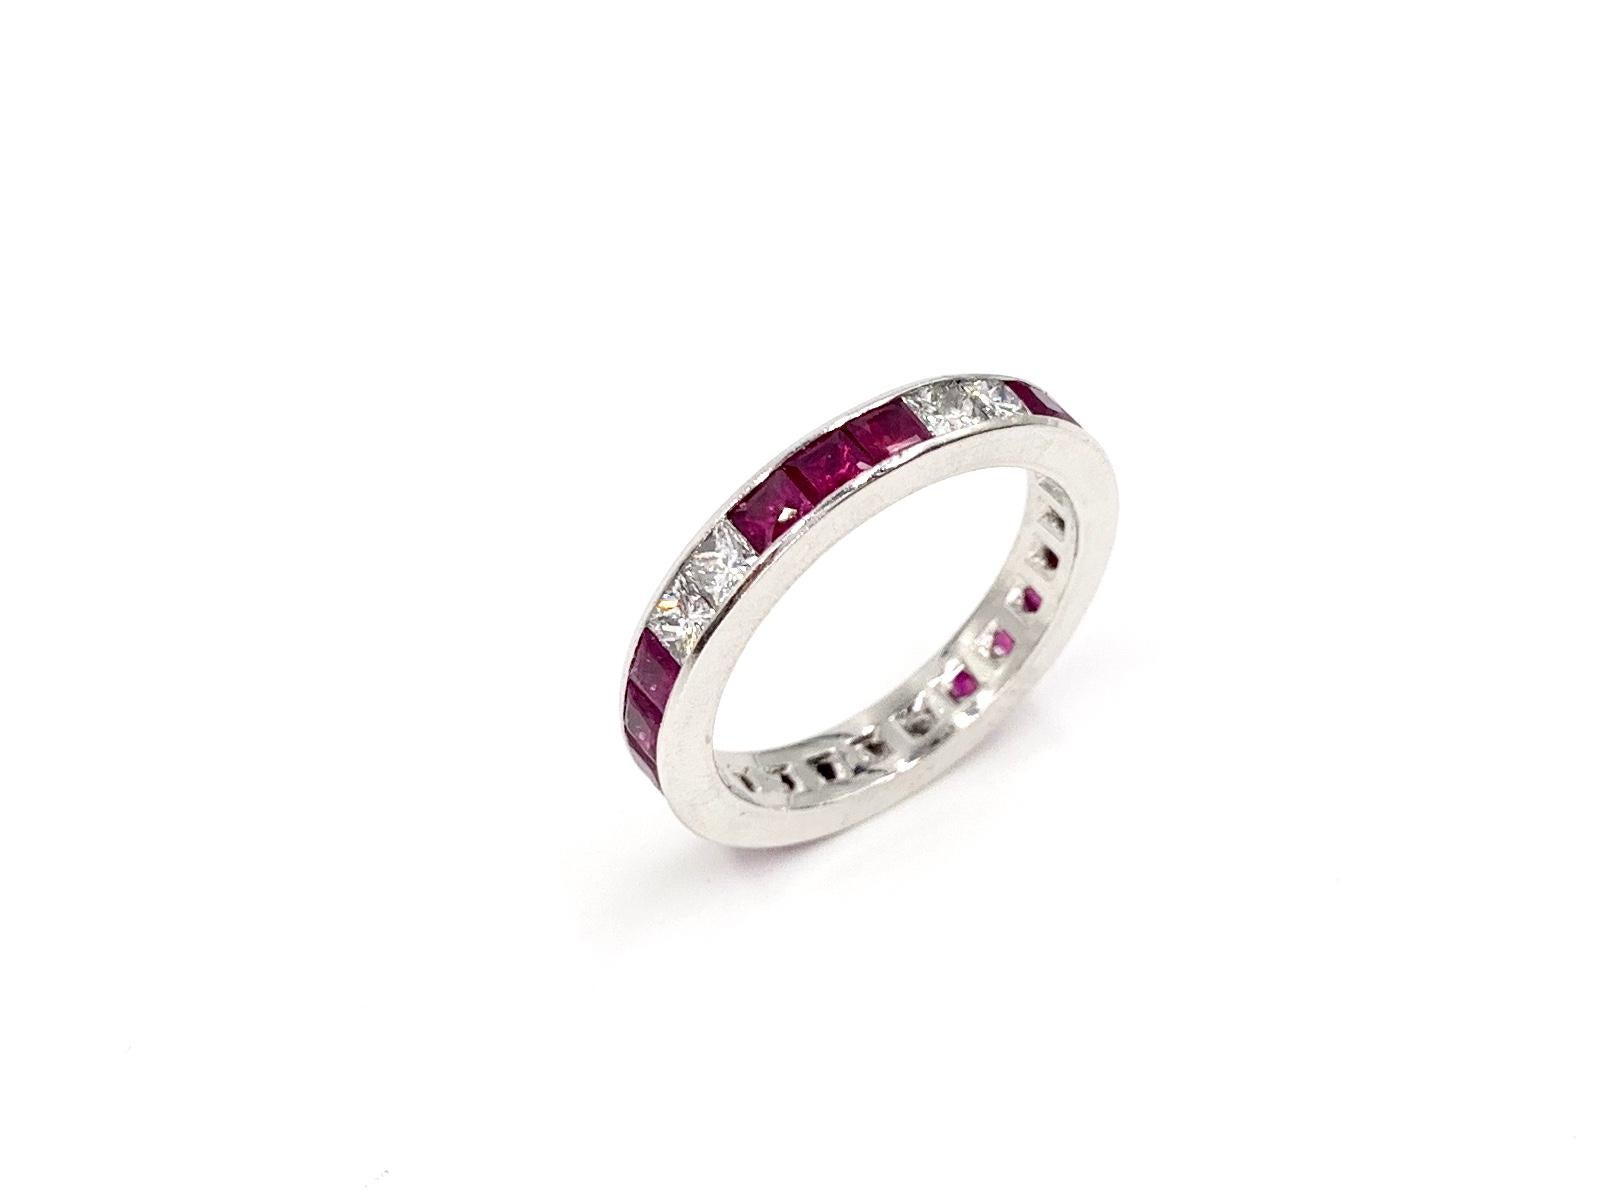 A sleek and well made platinum eternity channel set 3.5mm band featuring 4.12 carats of french cut rubies and 2.20 carats of princess cut diamonds set in a beautiful pattern with two diamonds for every 3 rubies. Diamond quality is approximately G